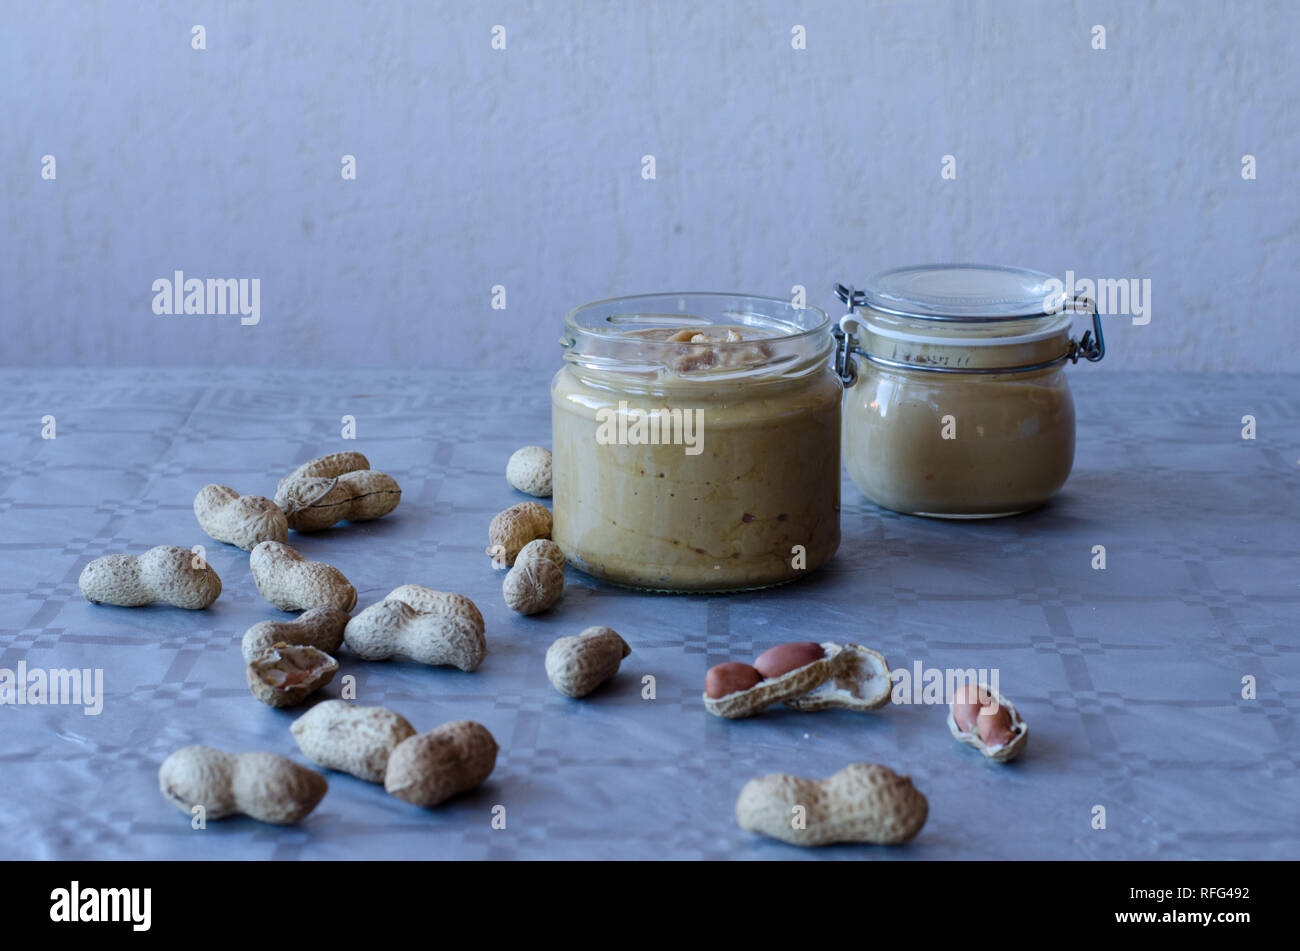 Homemade peanut butter in glass jar with peanuts spread on the table Stock Photo